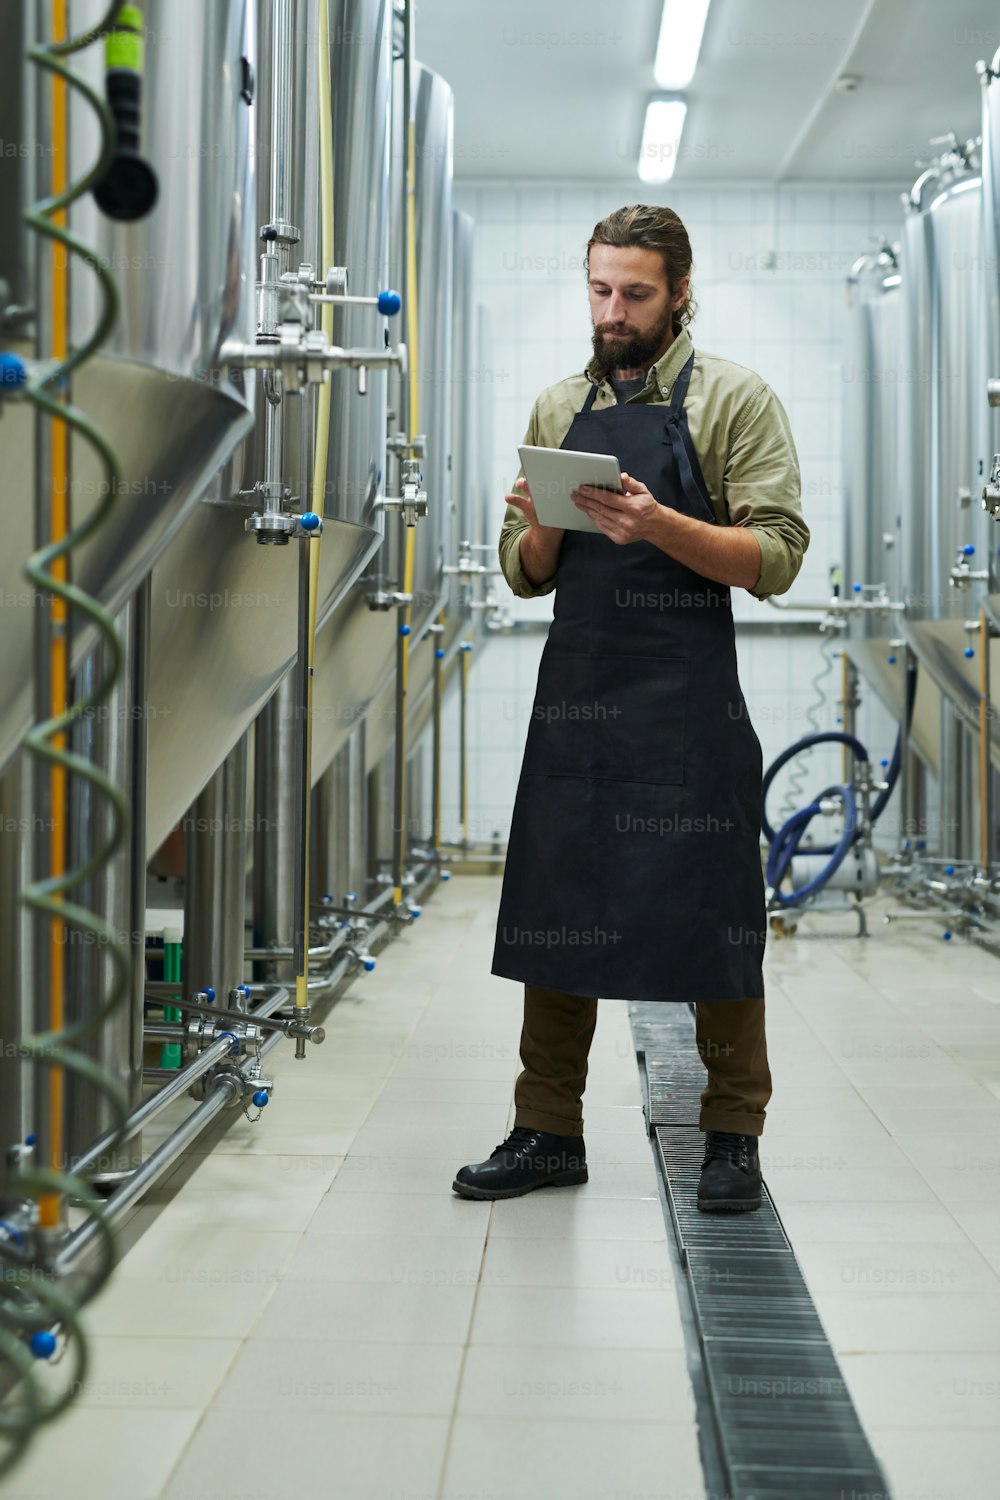 Beer brewery owner controlling production process via application on digital tablet